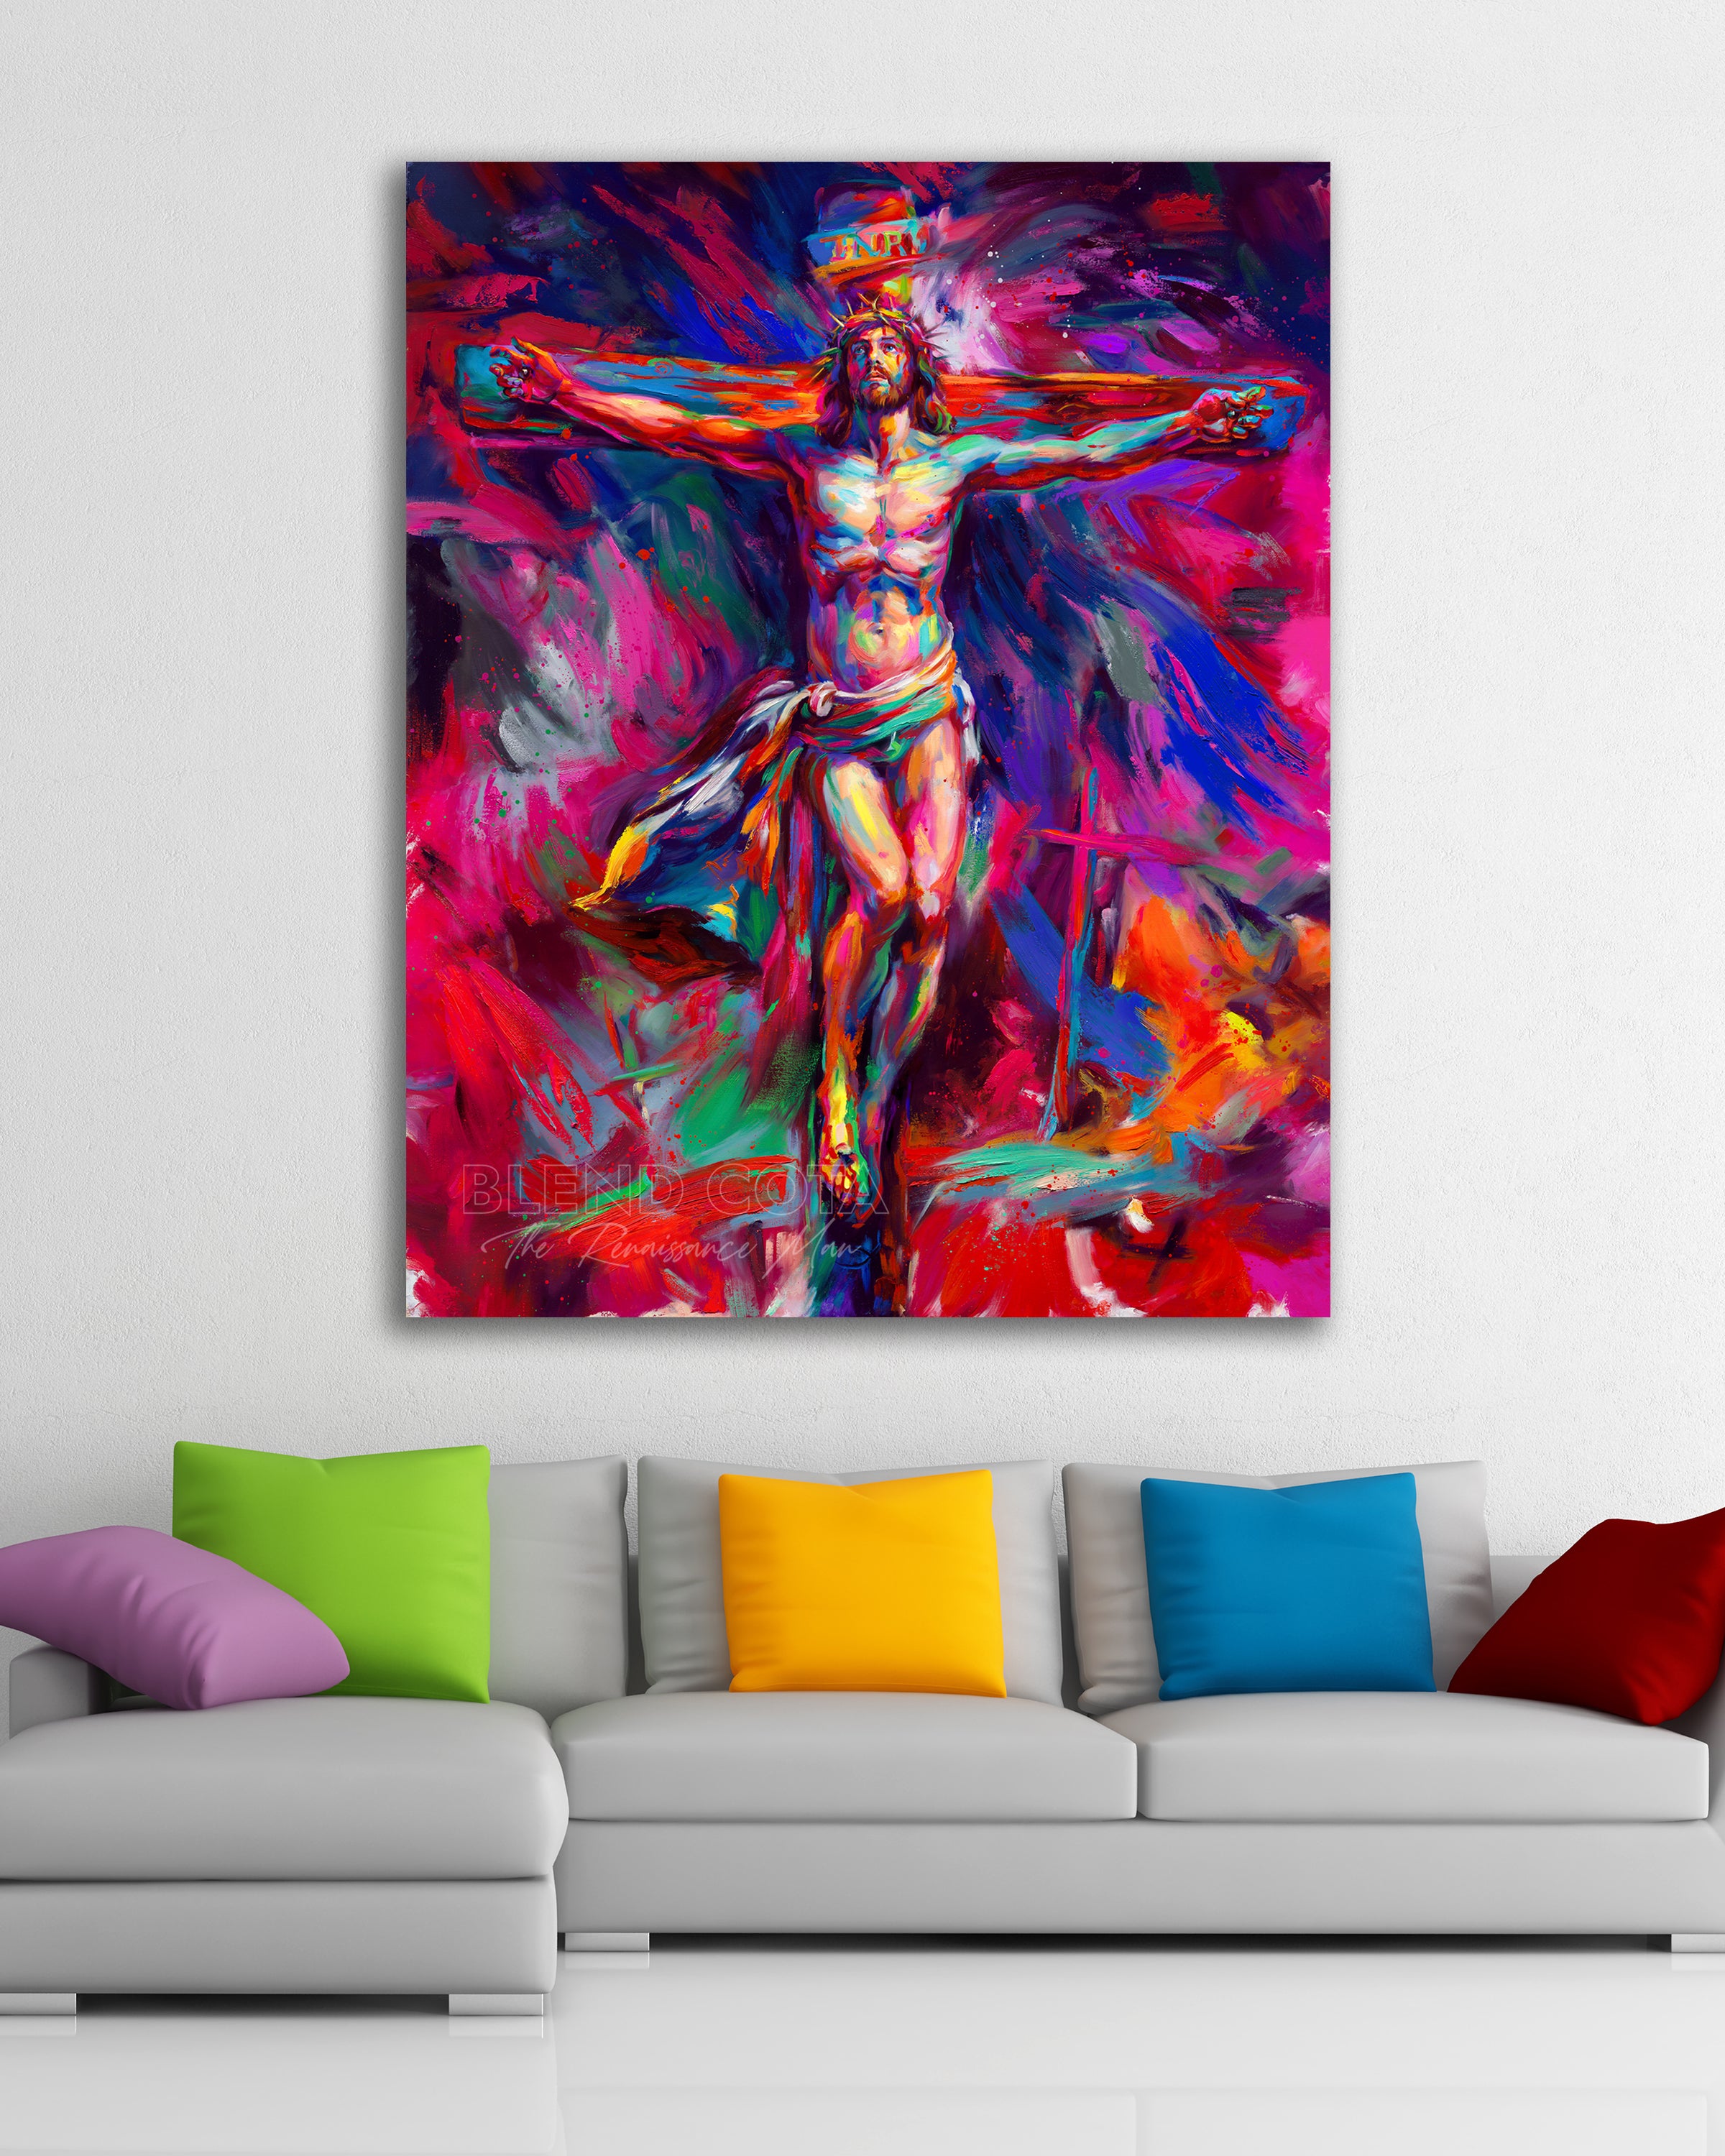 For The Love of God | Jesus Crucifixion - Blend Cota Limited Edition Art on Canvas - Blend Cota Studios painting hanging on a white wall behind a colorful couch